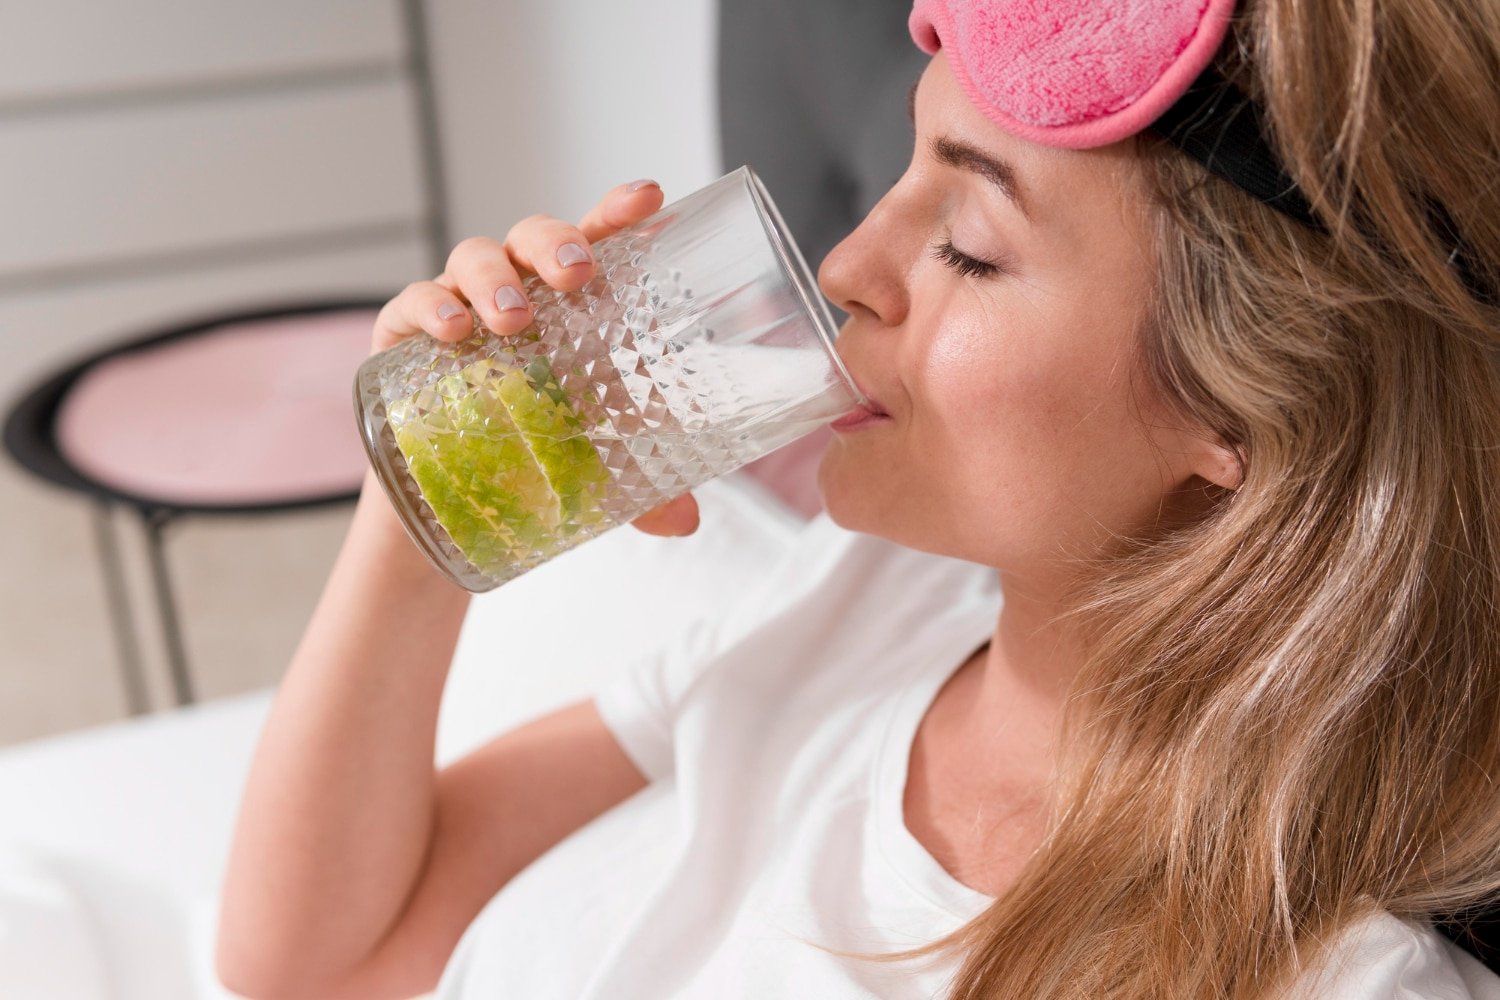 Hint Water Sipping on Wellness: The Best Flavored Water